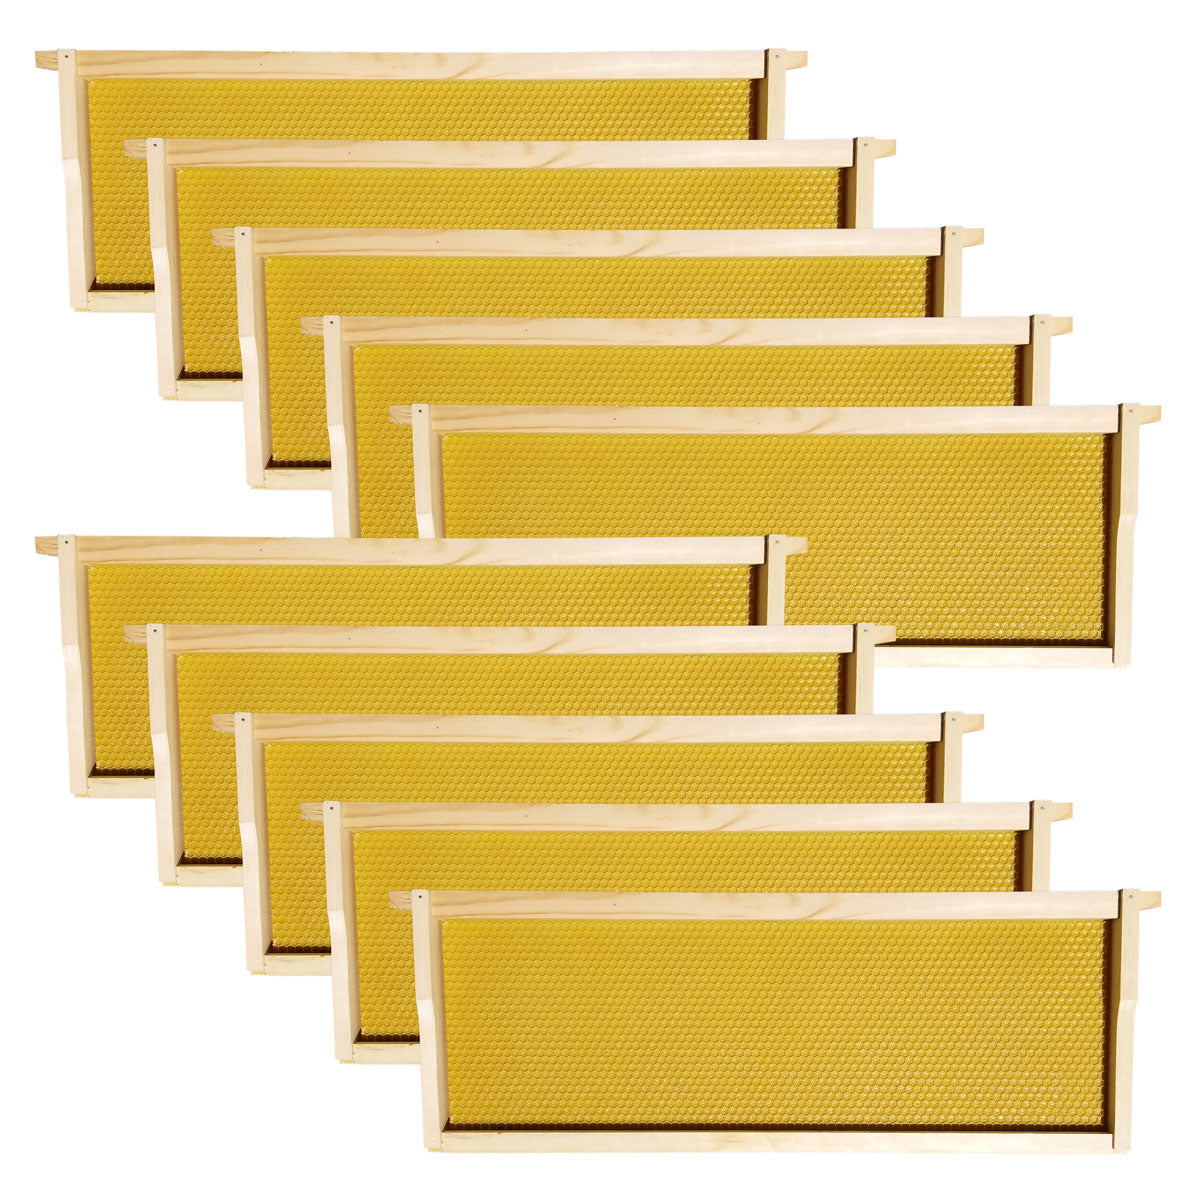 10 Cell Tech Medium Frames With Honey Colored Foundations To Help Inspect Honey In Cells